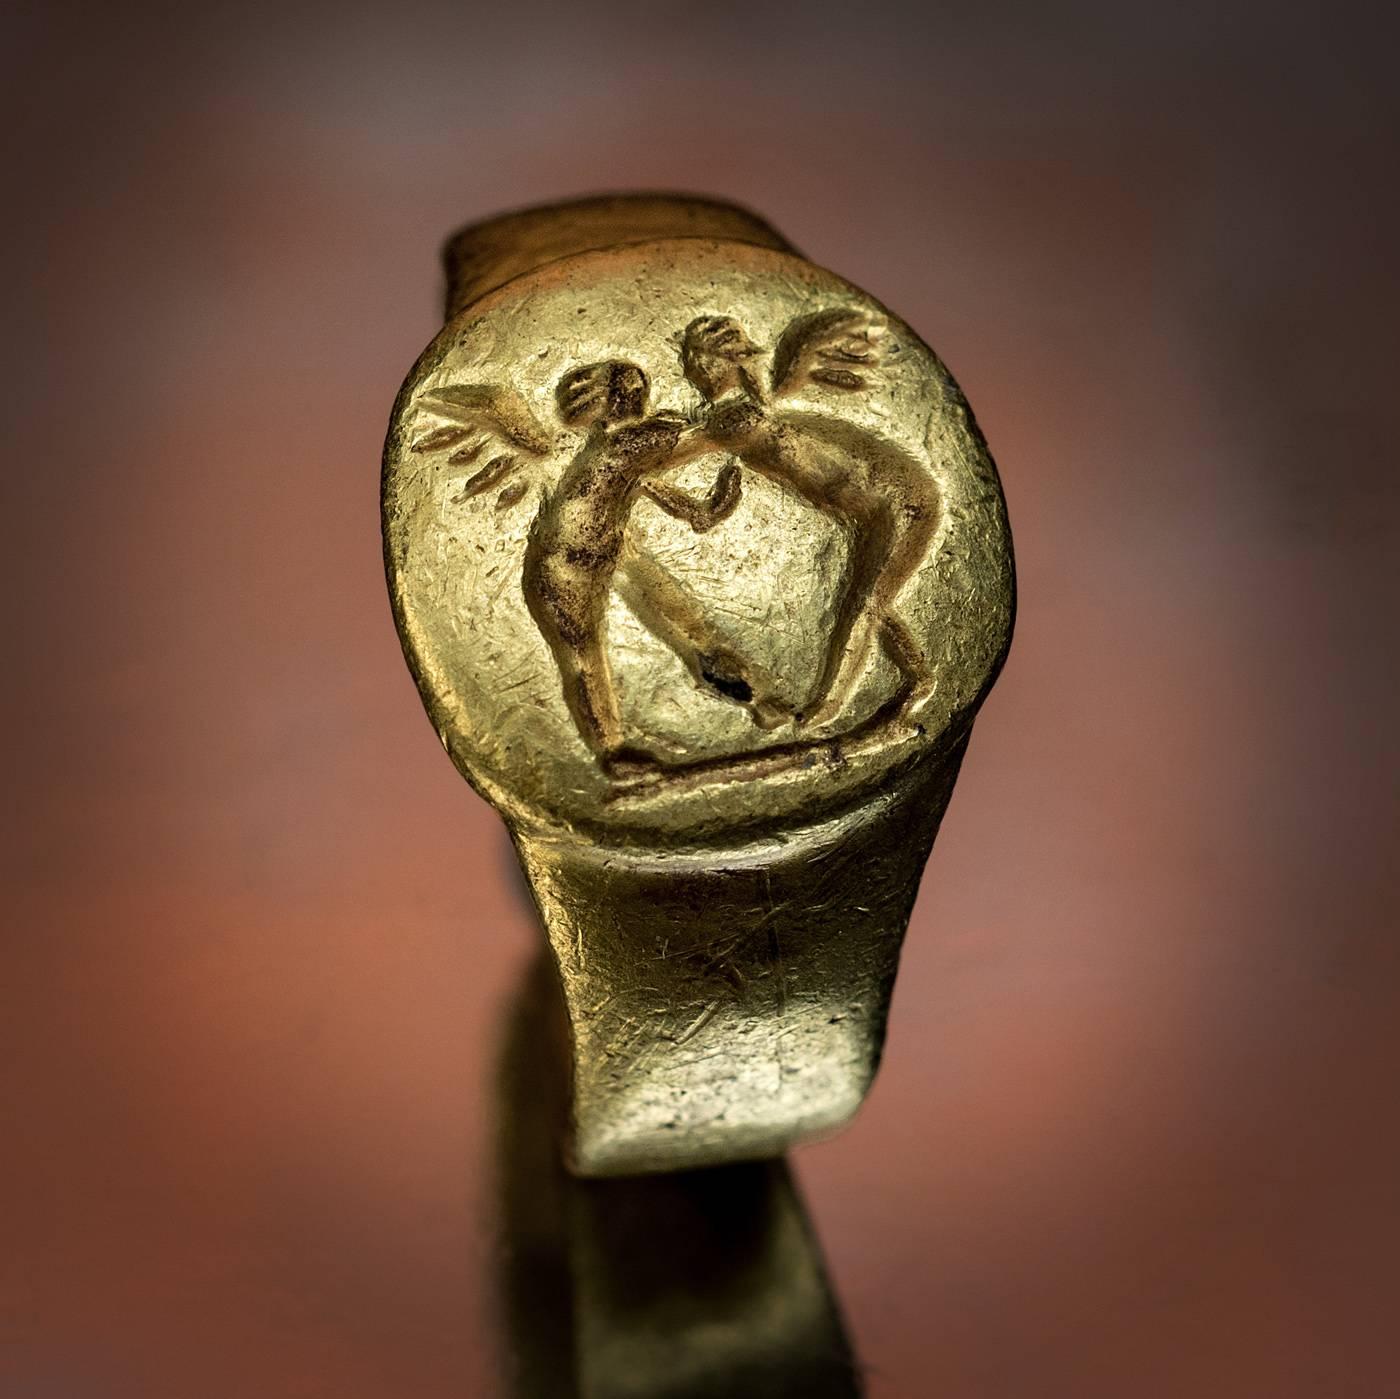 A unique, museum quality ancient Greek gold ring, circa 4th century BC, likely a wedding ring.

The ring is engraved with two wrestling Erotes. When Aphrodite (Greek goddess of love, beauty and pleasure) was born from the sea she was greeted by the